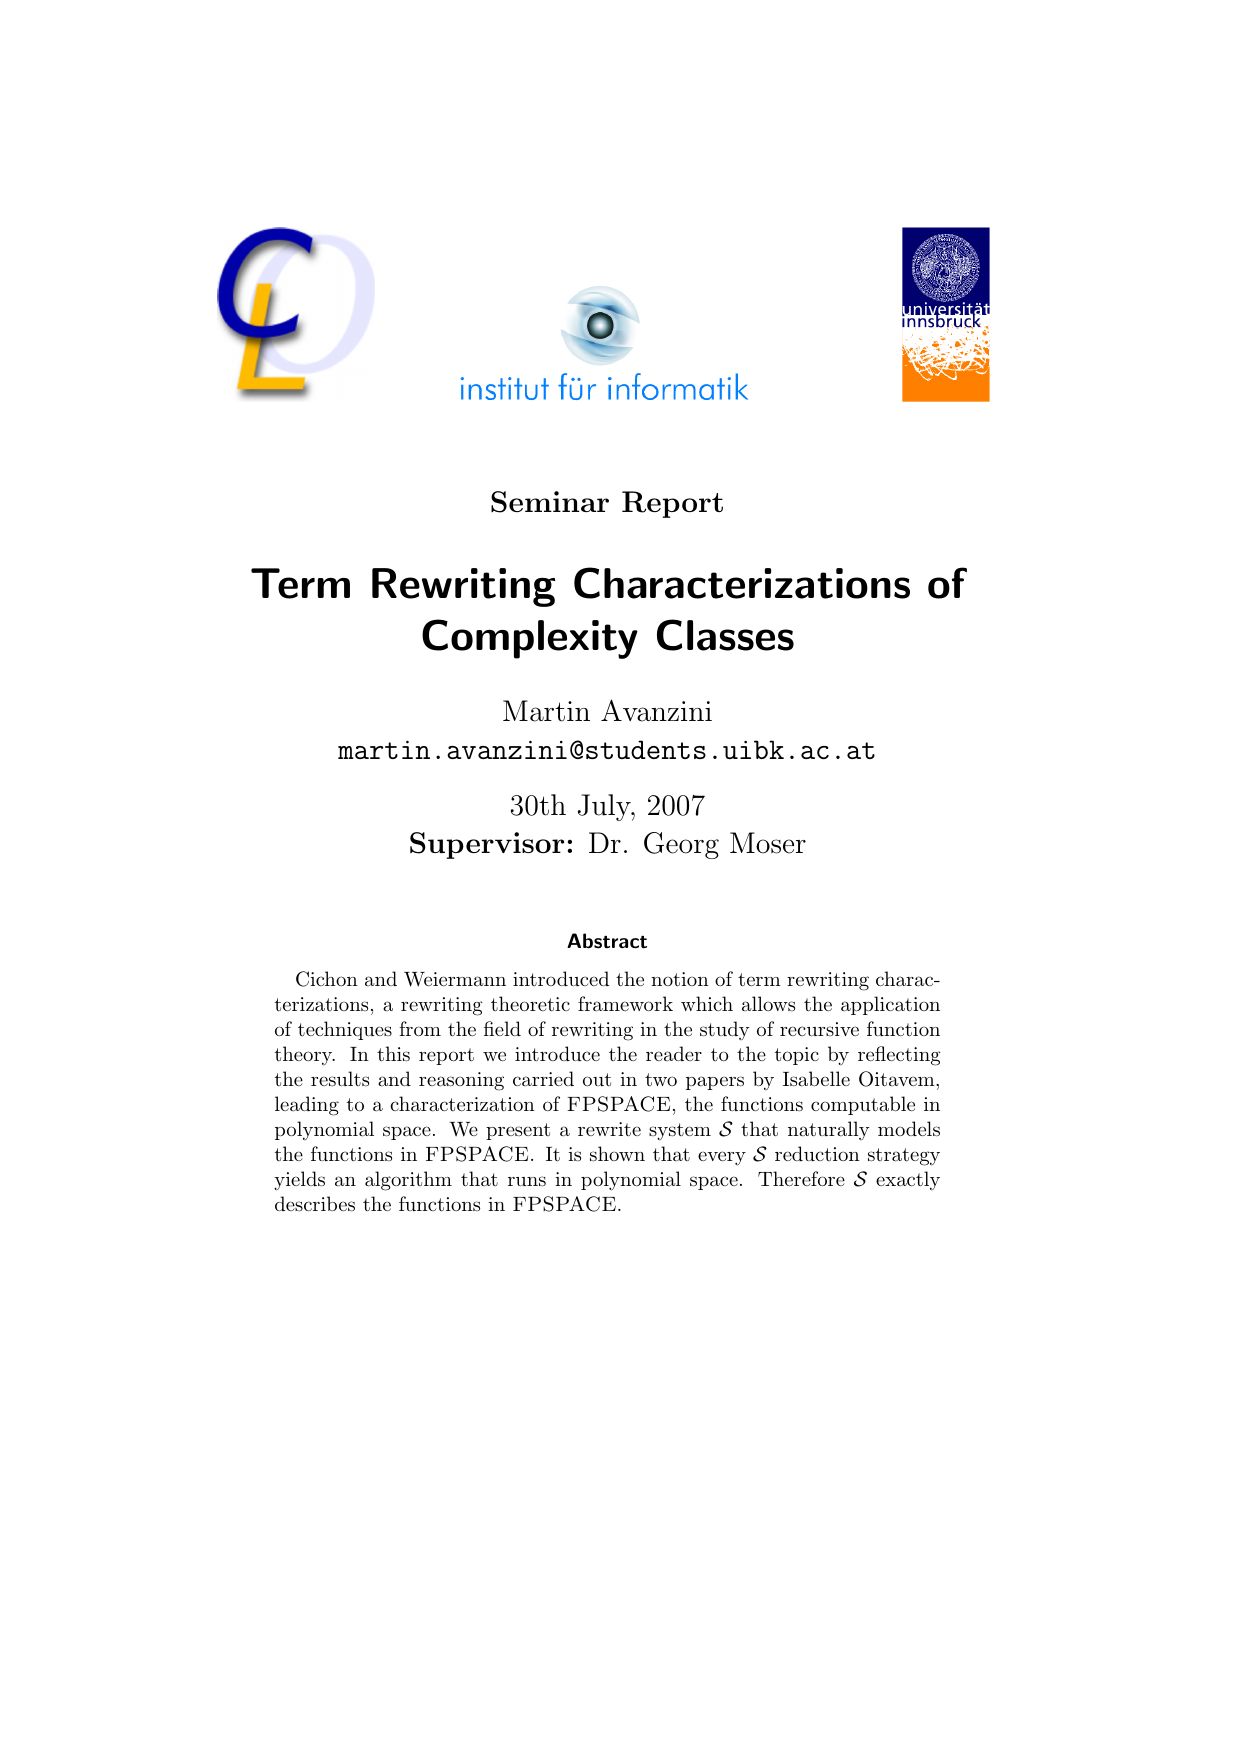 Term Rewriting Characterizations of Complexity Classes